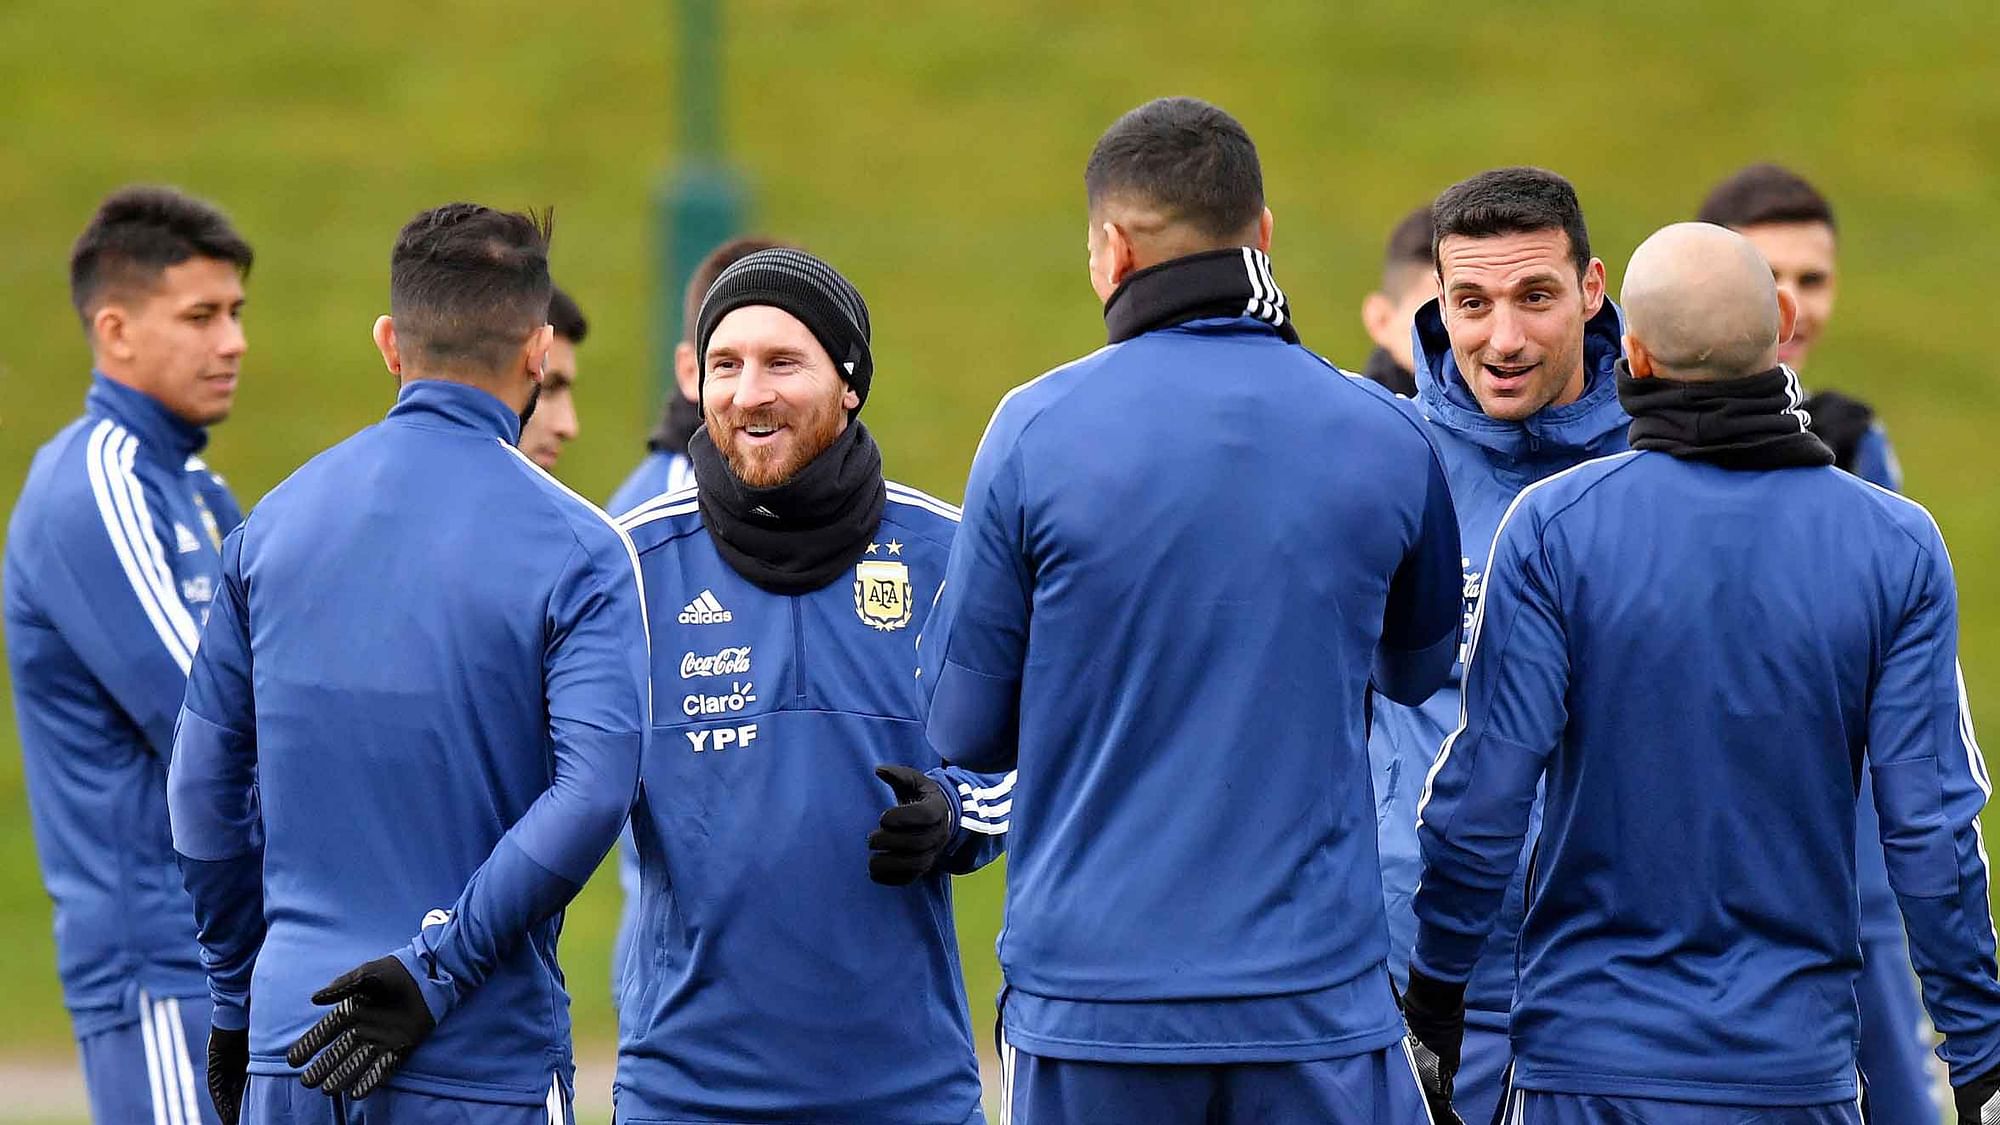 Argentina will play Italy in an international friendly on Friday, 23 March.